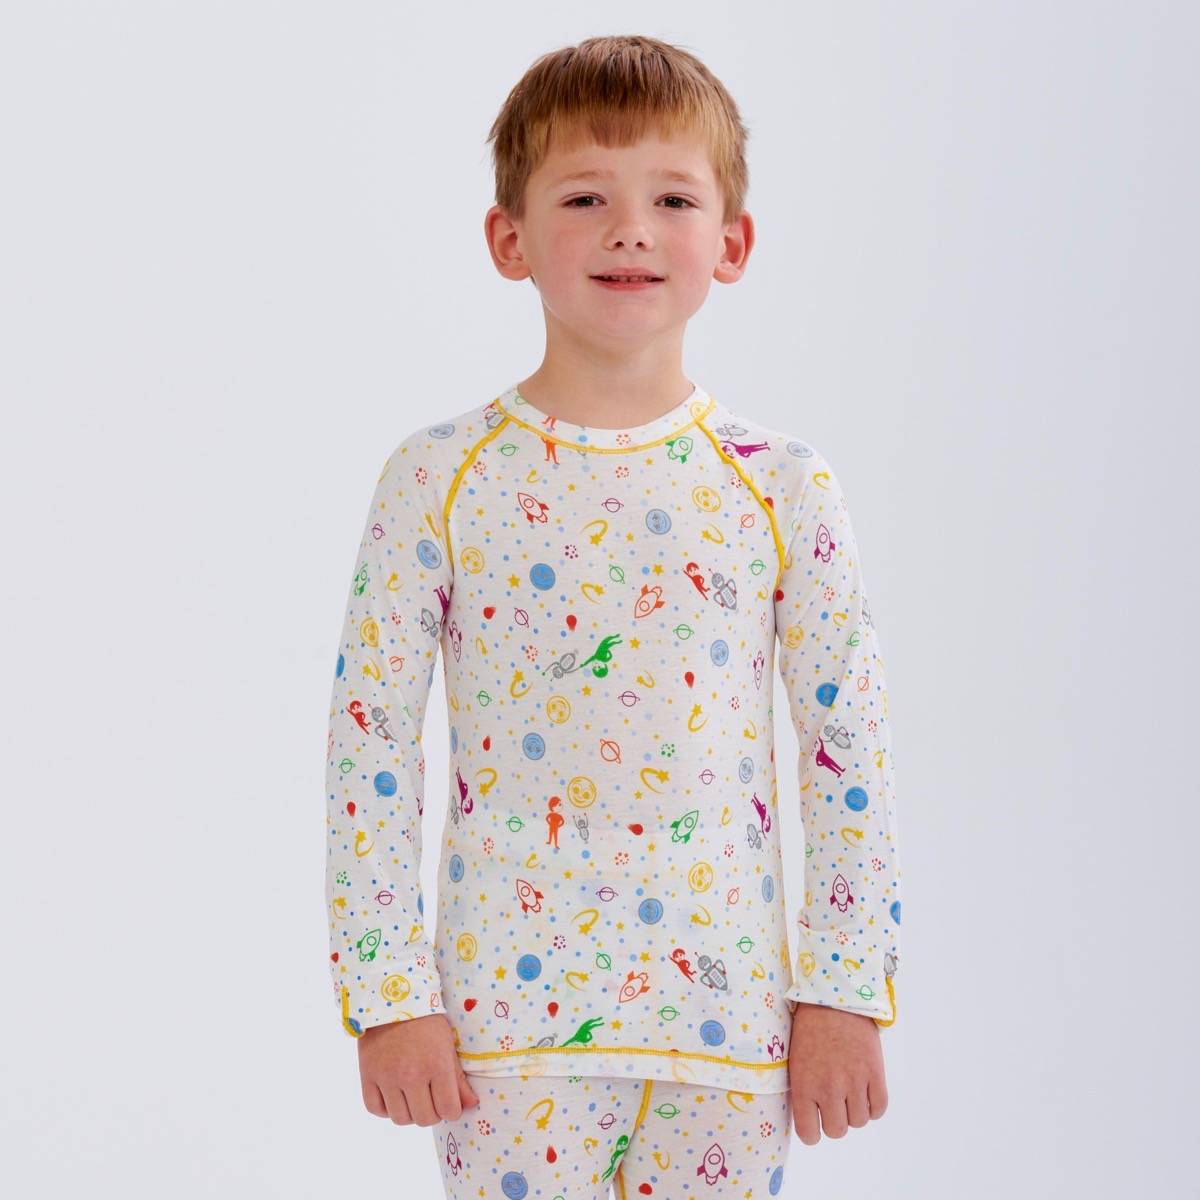 Soothems Eczema Pajamas Kids Shirt for Wet Wrap Therapy With No-Scratch Mitts | Soothems Itch Relief Clothing 4 / White